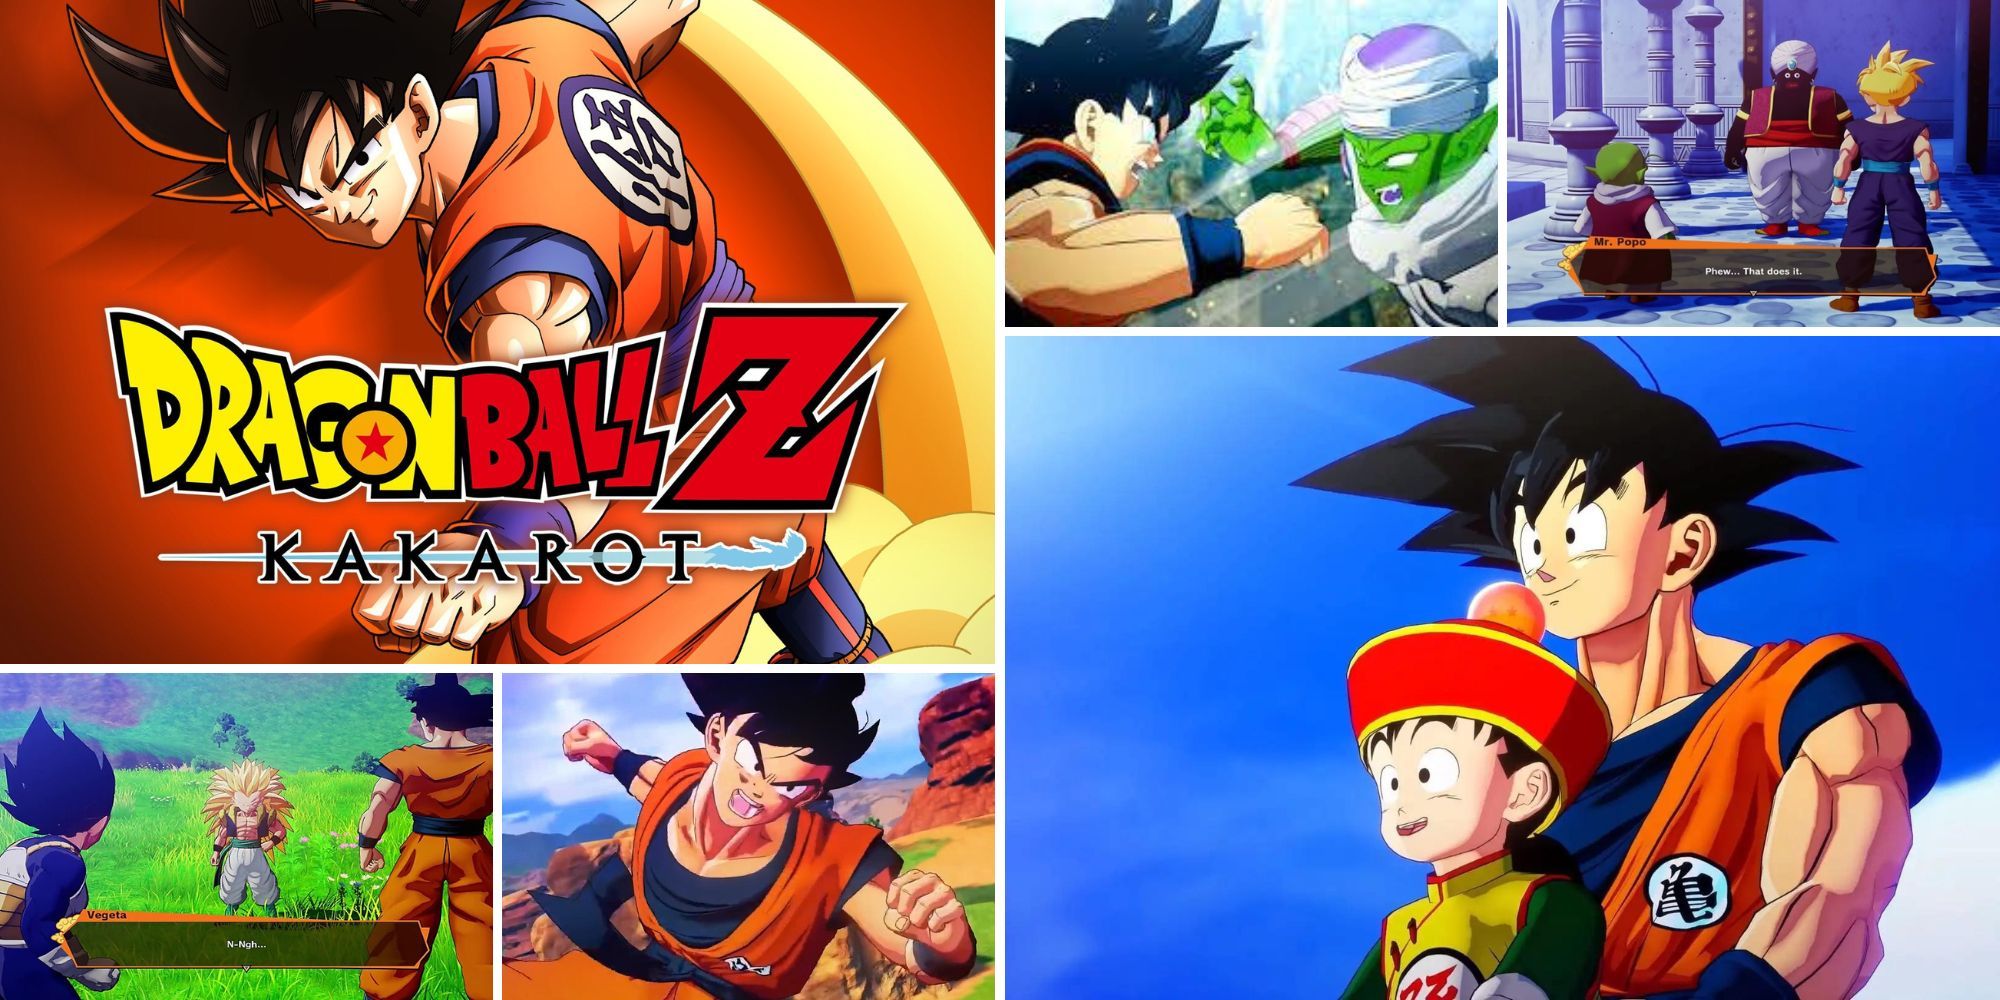 Dragon Ball Z Kakarot split image Kakarot and other characters in substory scenes